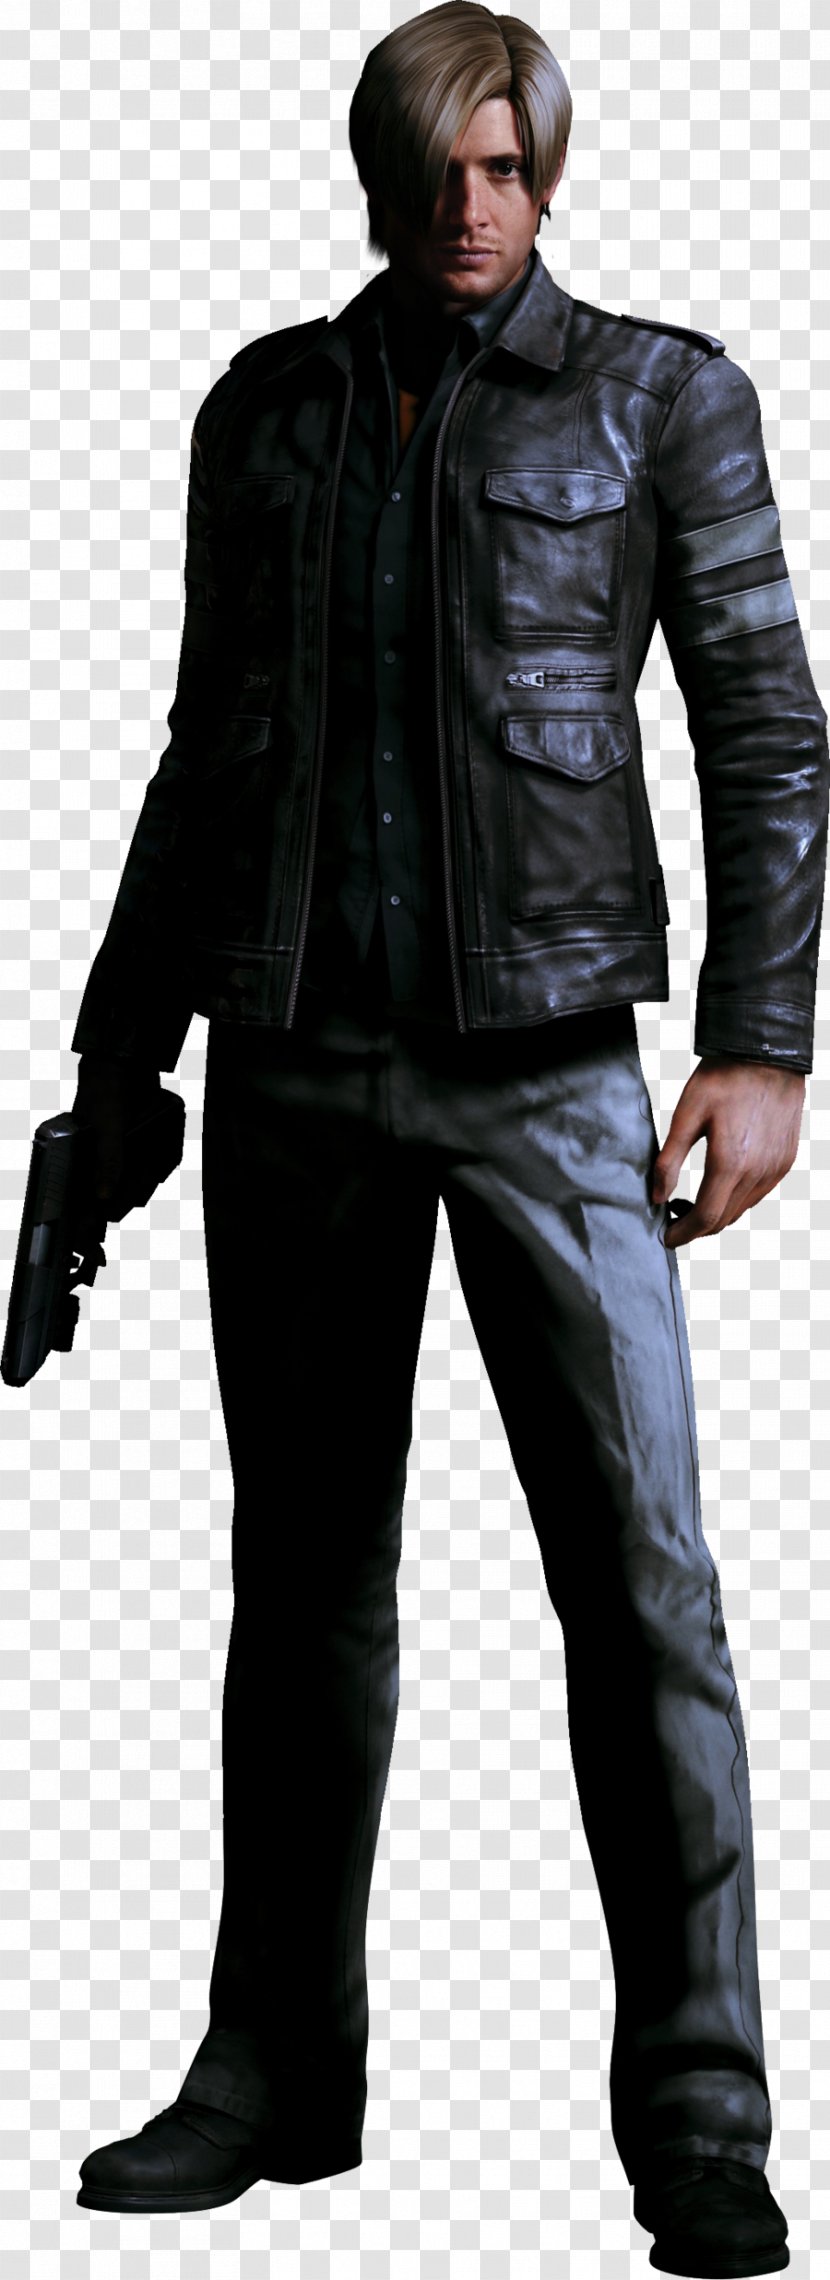 Resident Evil 6 4 2 Leon S. Kennedy Chris Redfield - Leather - Jensen Ackles Transparent PNG